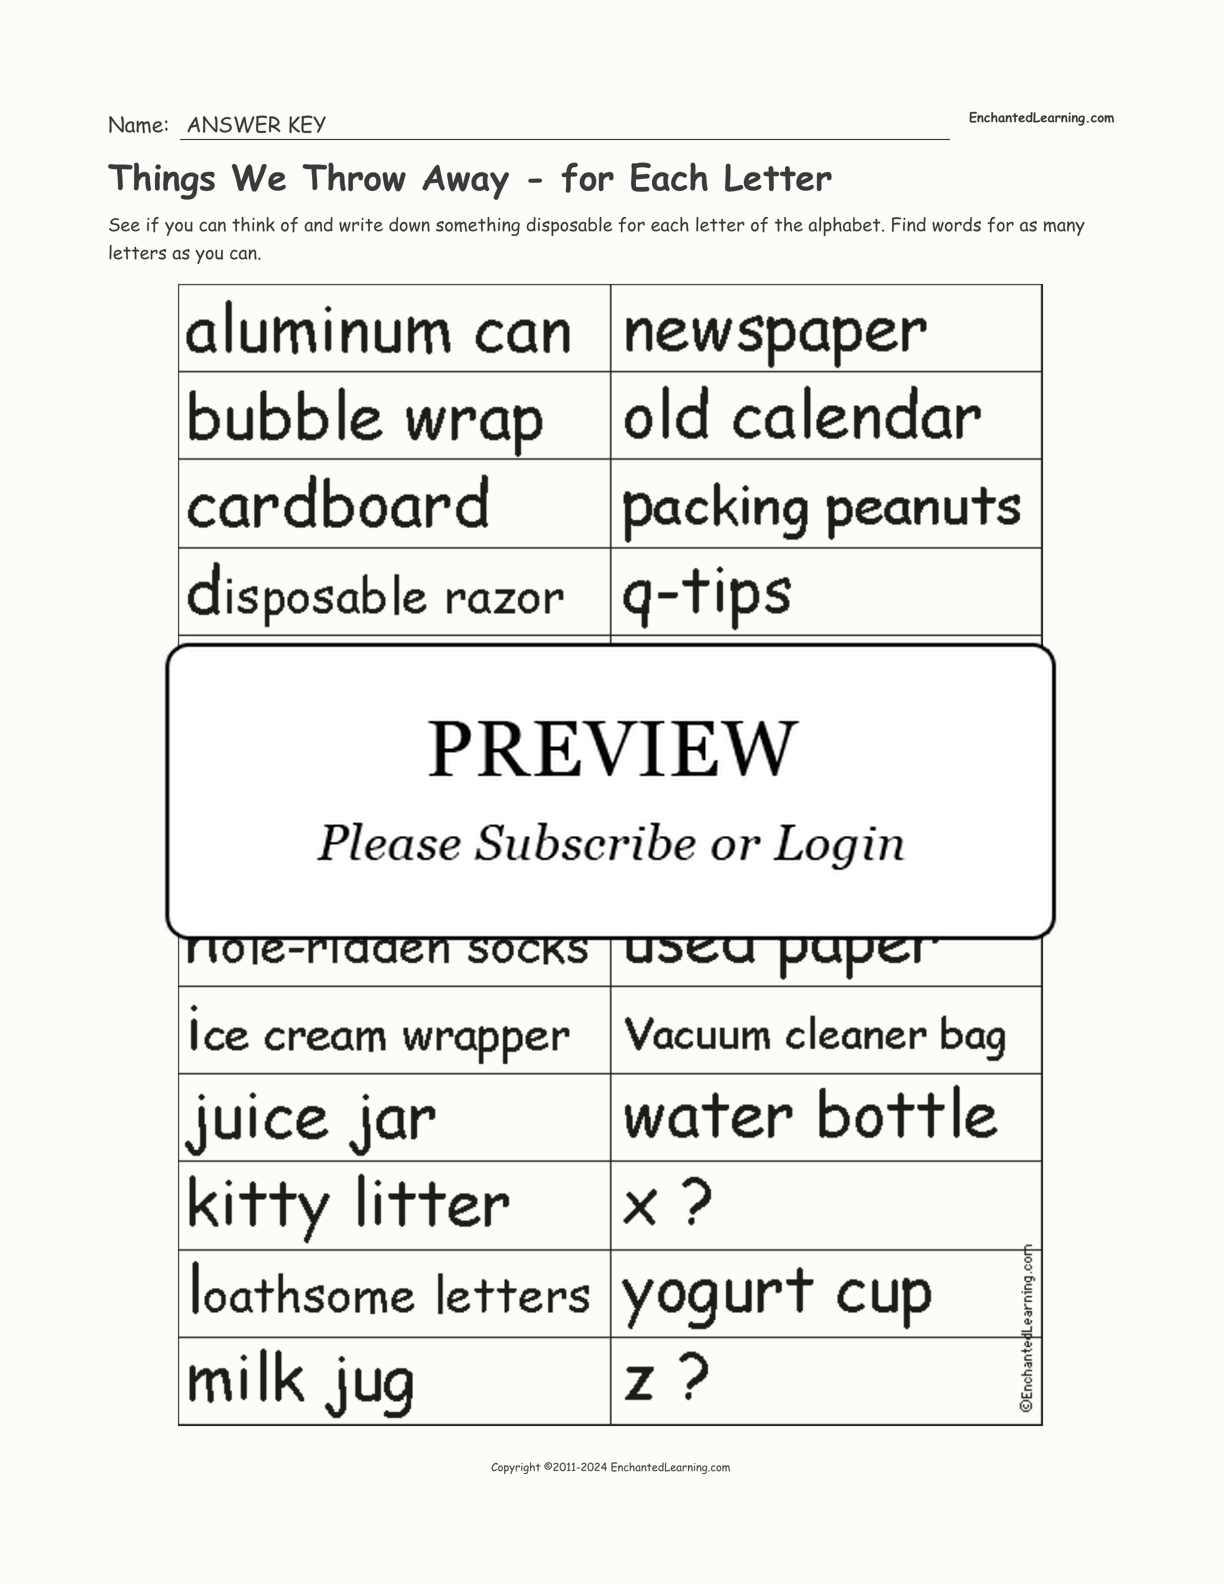 Things We Throw Away - for Each Letter interactive worksheet page 2